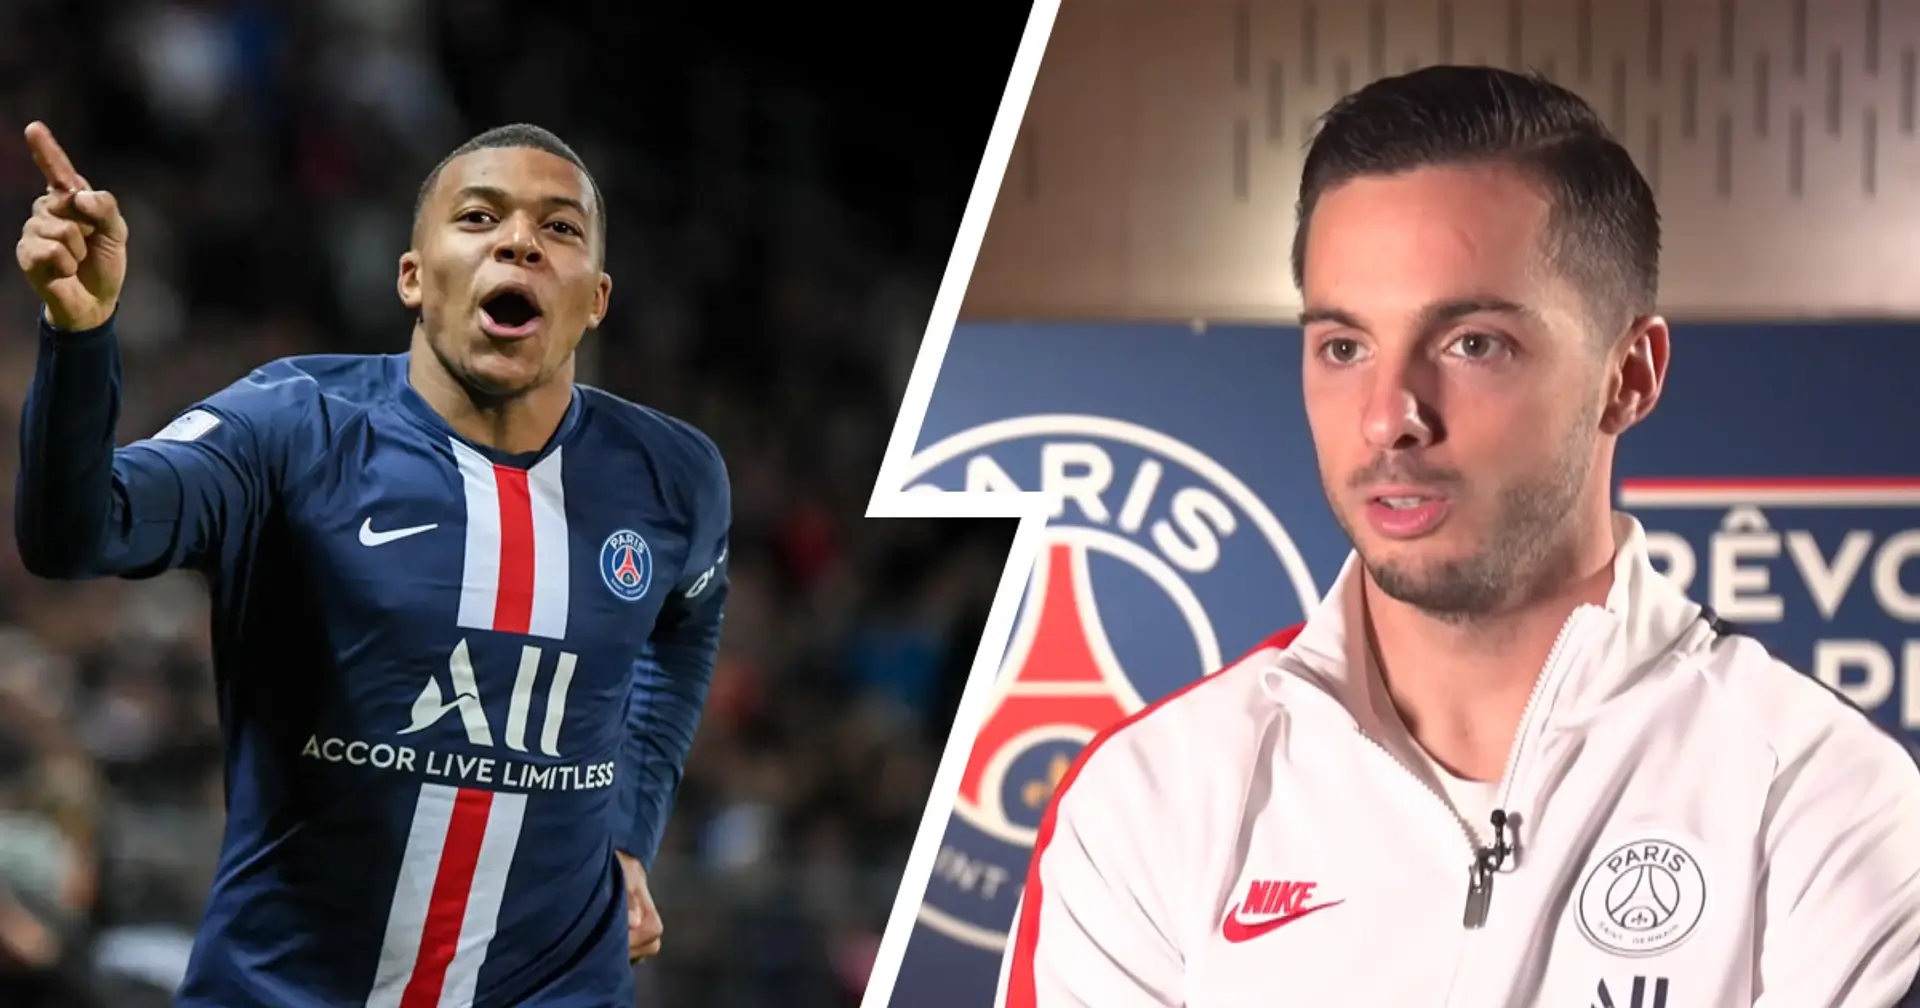 'Sometimes Mbappe answers me in Spanish. He likes the city of Madrid': Ex-Castilla prospect Sarabia teases Real Madrid fans